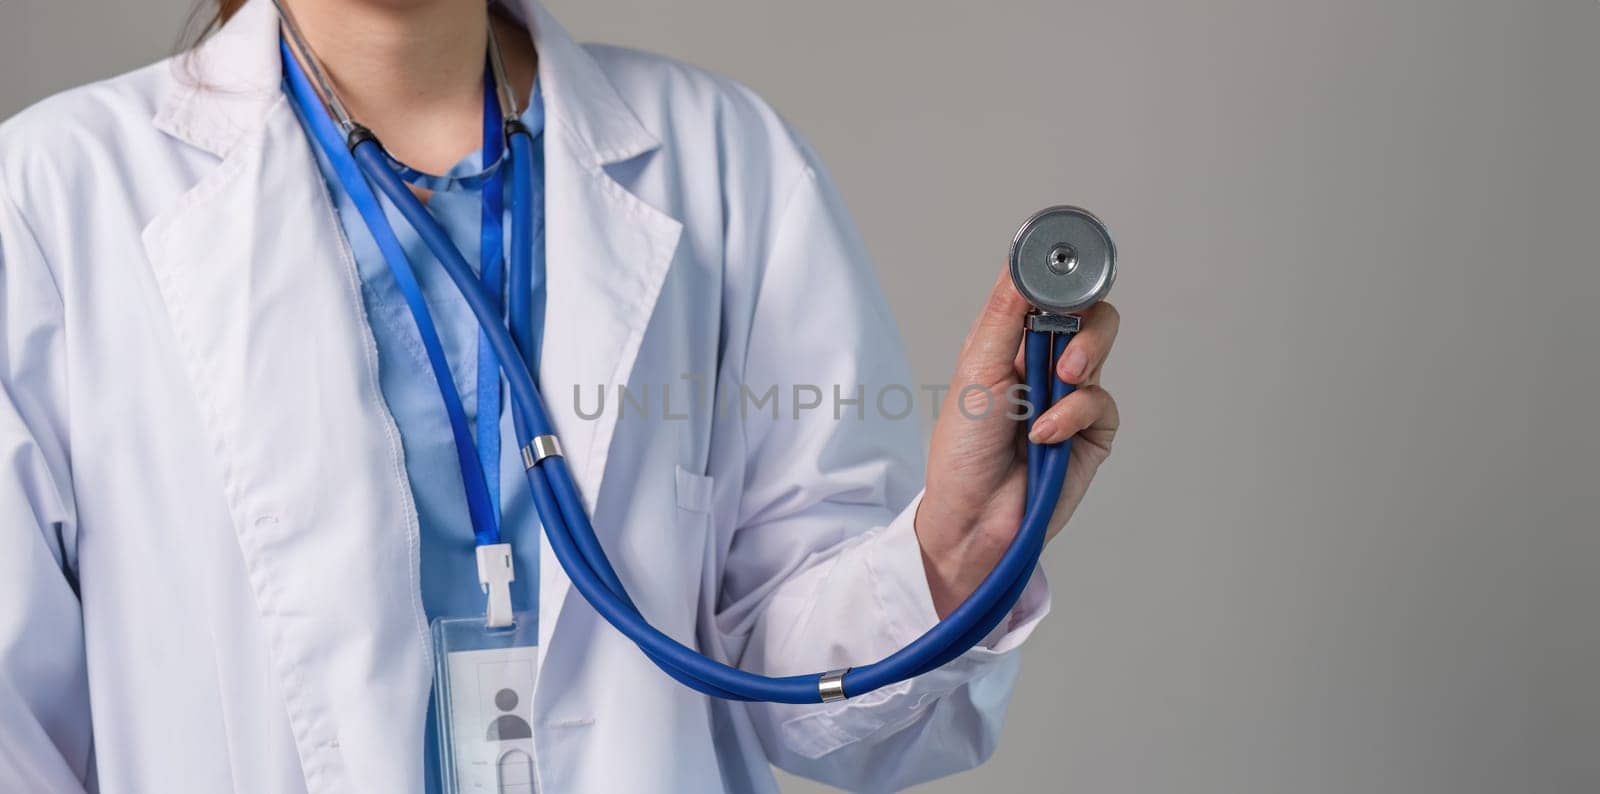 Close up female doctor using stethoscope on flat background. health care concept Female doctor using equipment to check patient's health.